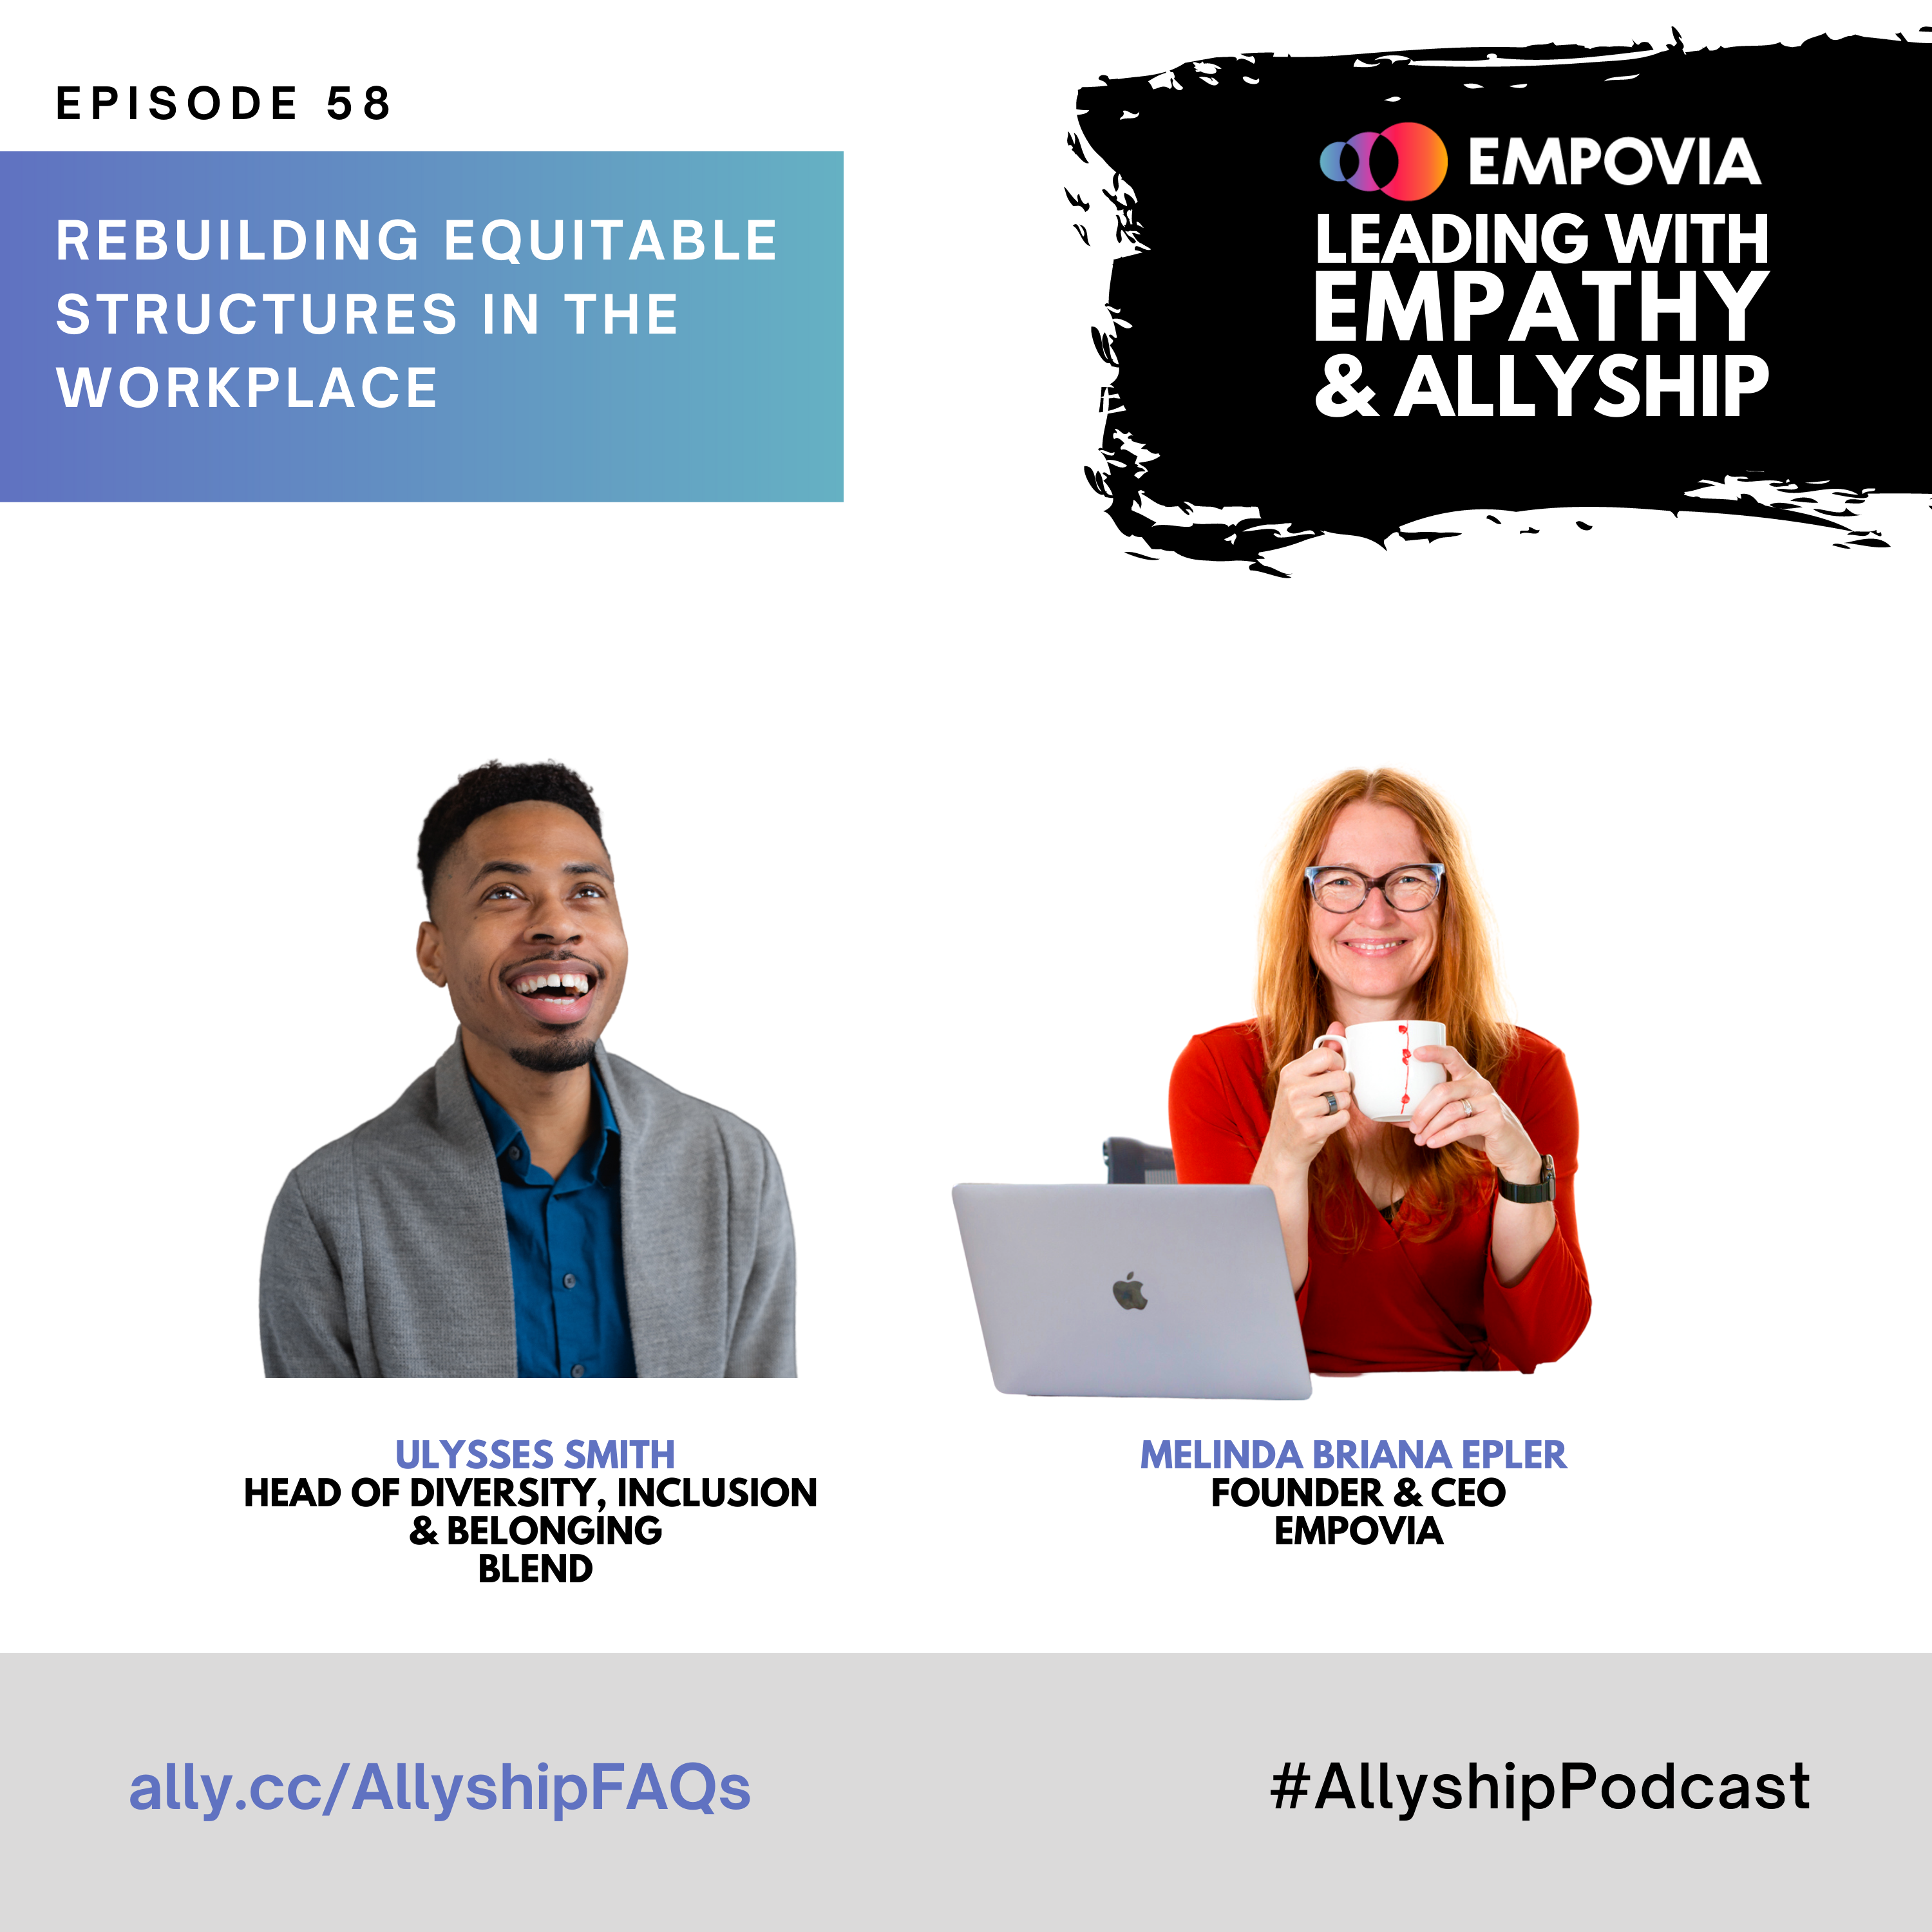 Leading With Empathy & Allyship promo with the Empovia logo and photos of Ulysses Smith; a Black man with curly black hair, navy shirt, and gray cardigan; and host Melinda Briana Epler; a White woman with red hair, glasses, and orange shirt holding a white mug behind a laptop.